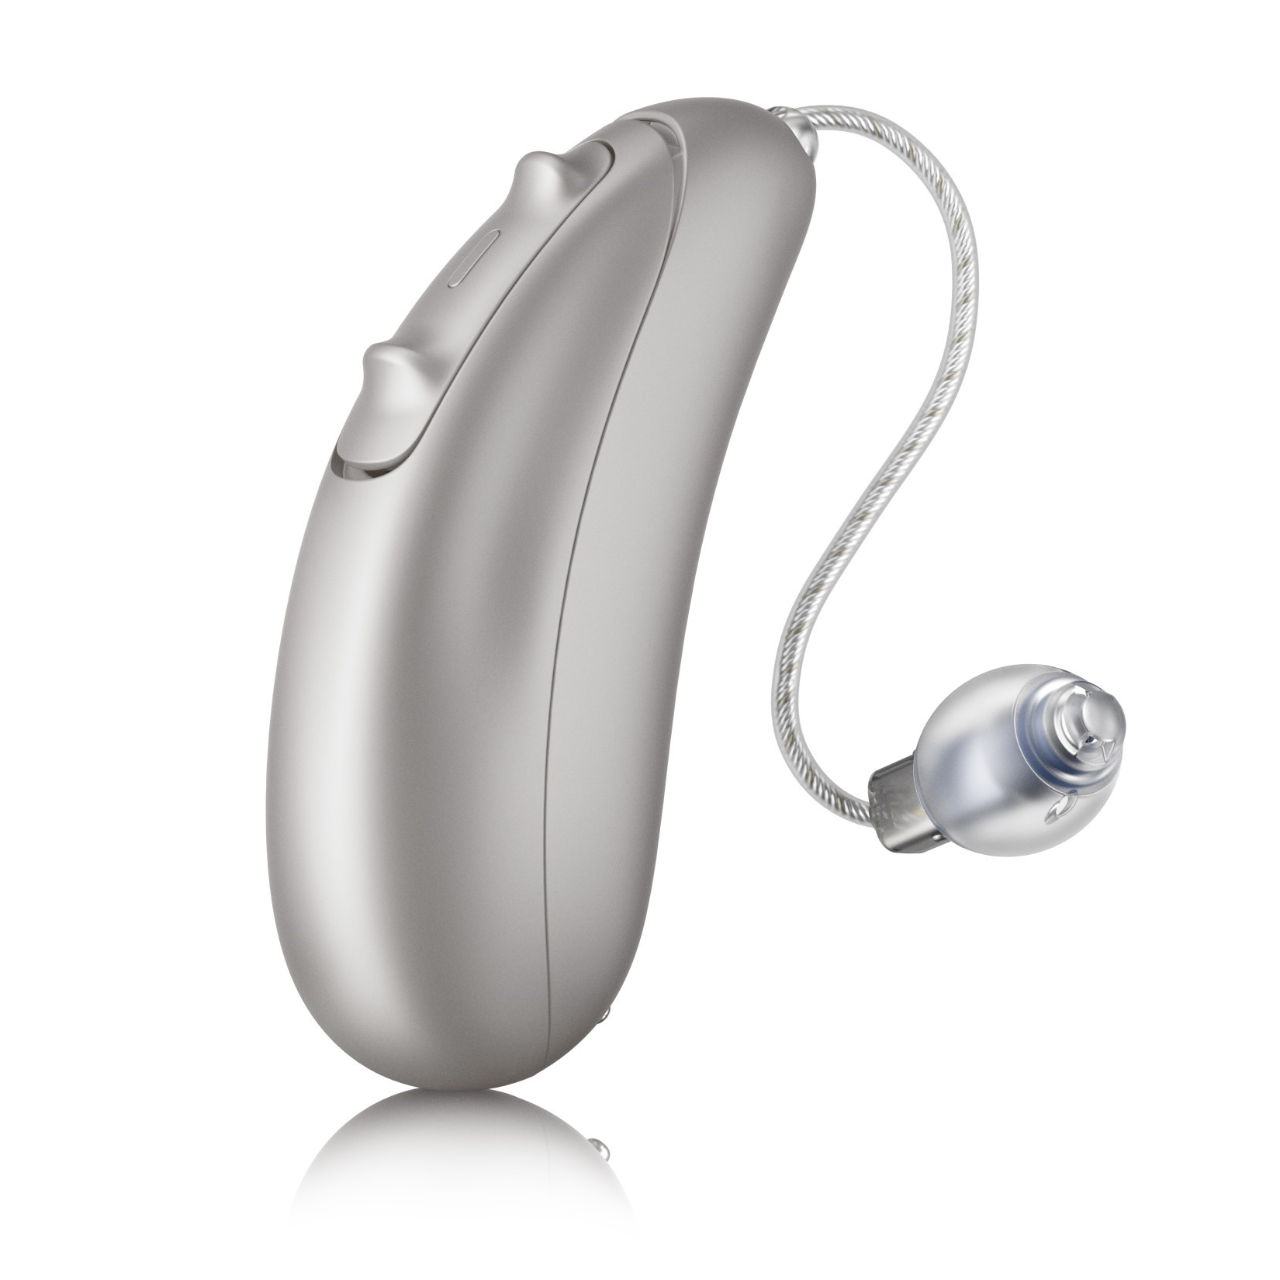 Relate3.0 RIC hearing aids